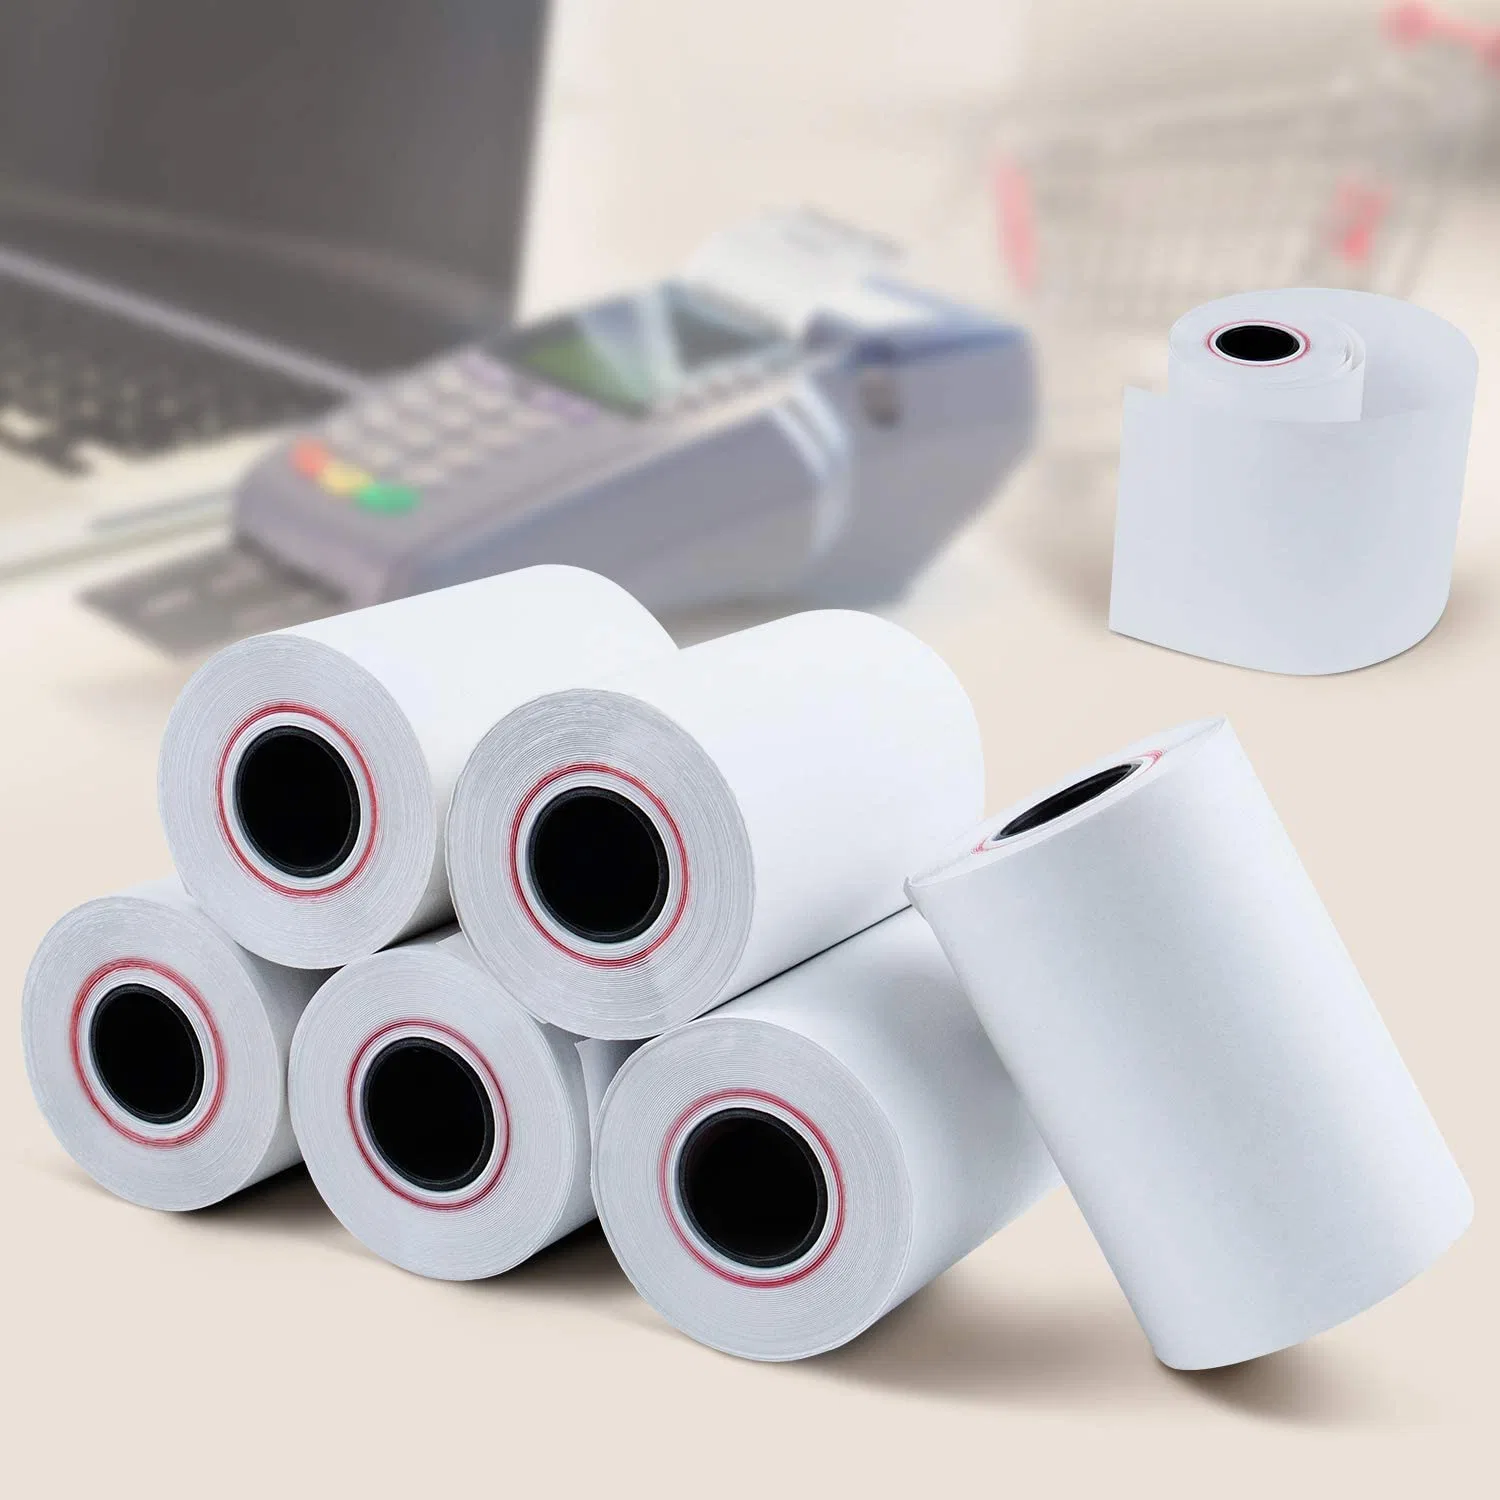 Factory Directly Cheap 80mm 58mm 60mm Width POS Thermal label Paper Rolls Jumbo Roll with Long Time Image Printing